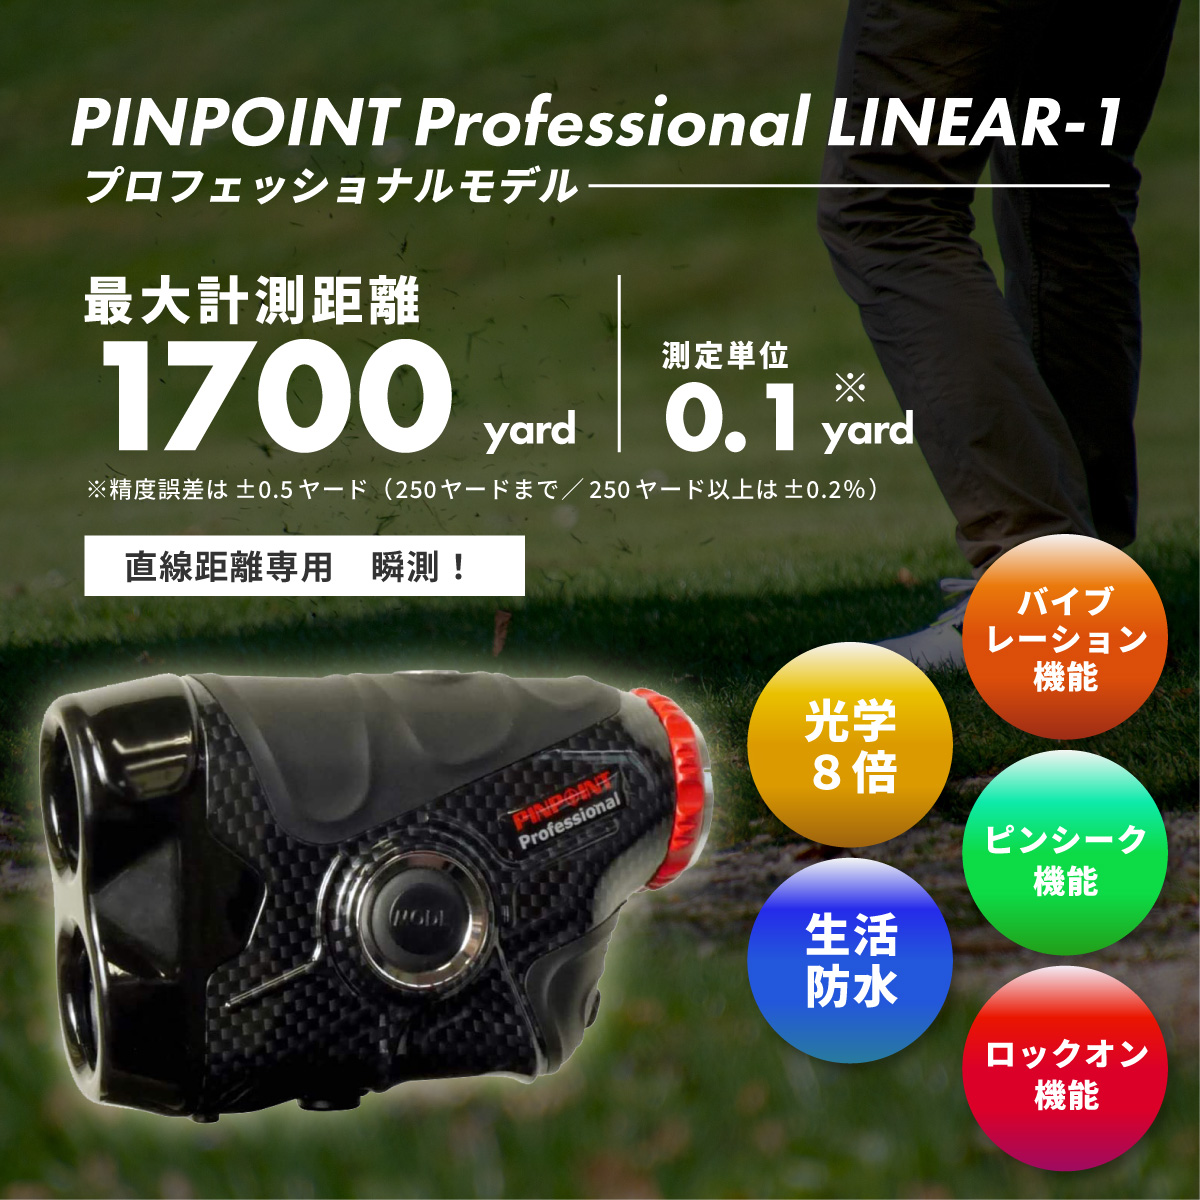 PINPOINT LINEAR-1　商品情報